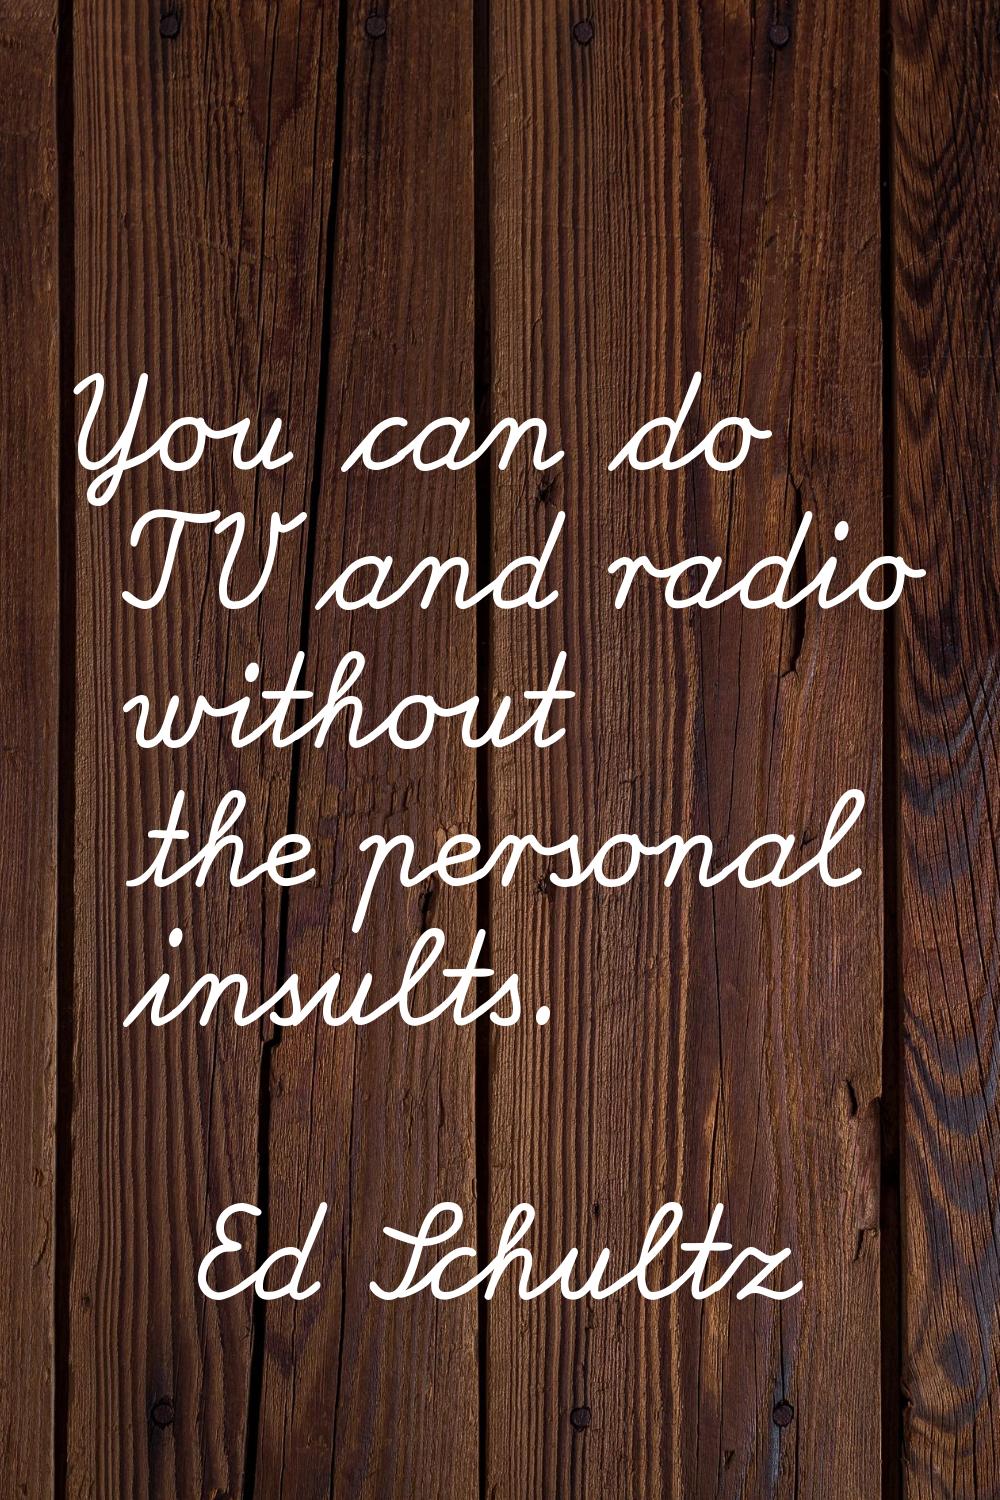 You can do TV and radio without the personal insults.